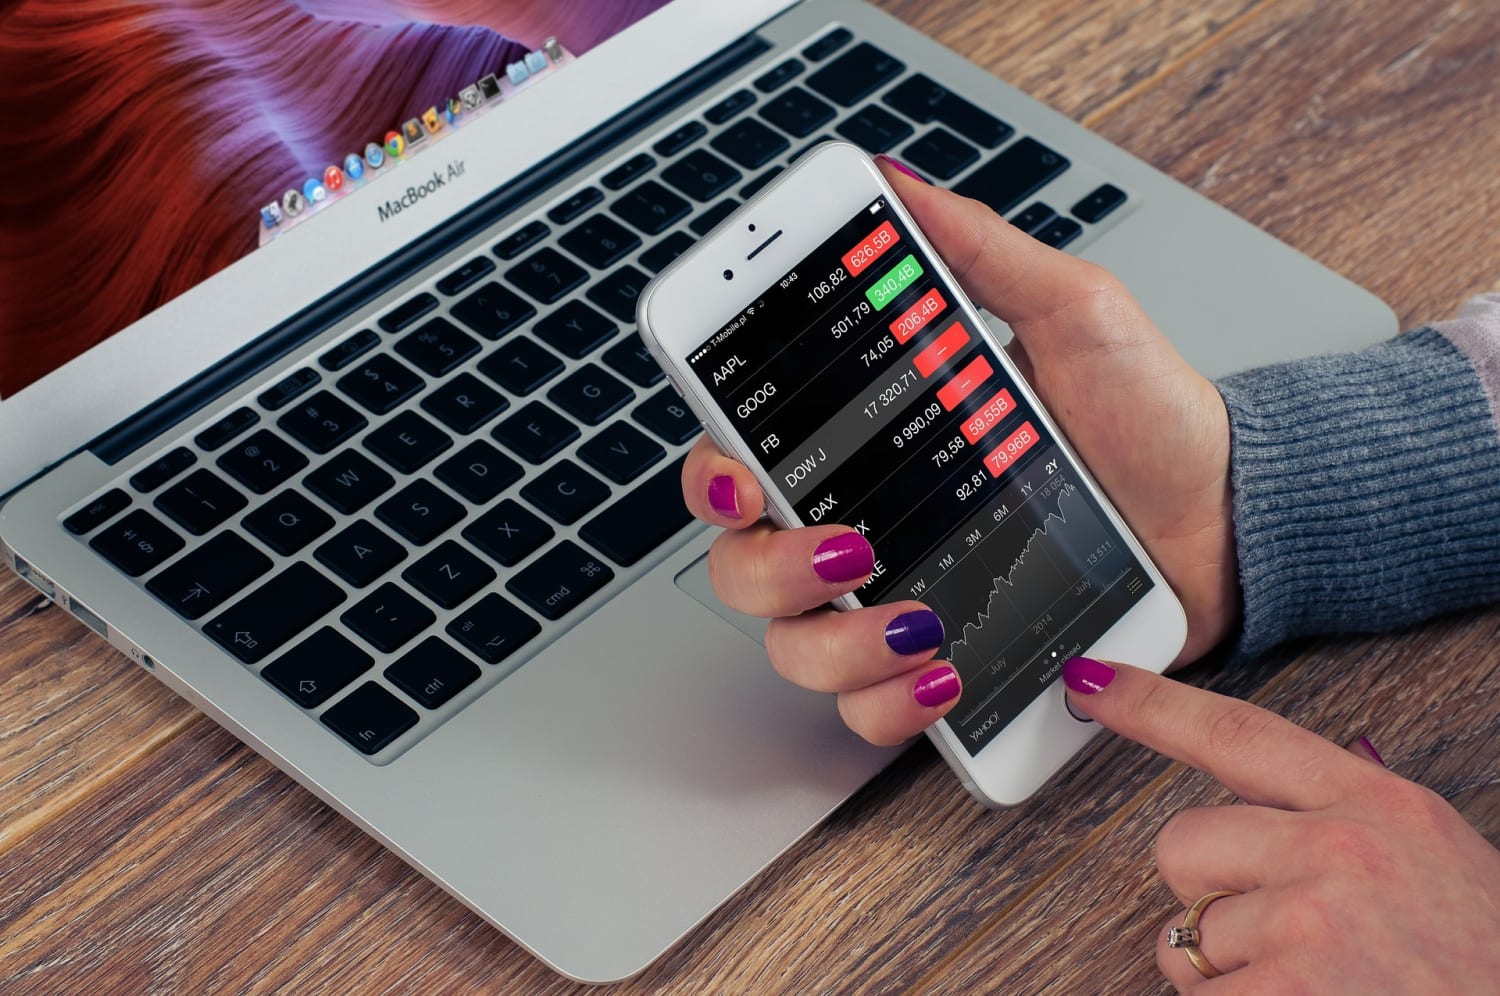 Investing Apps For Beginners: Stock Trading Made Simple